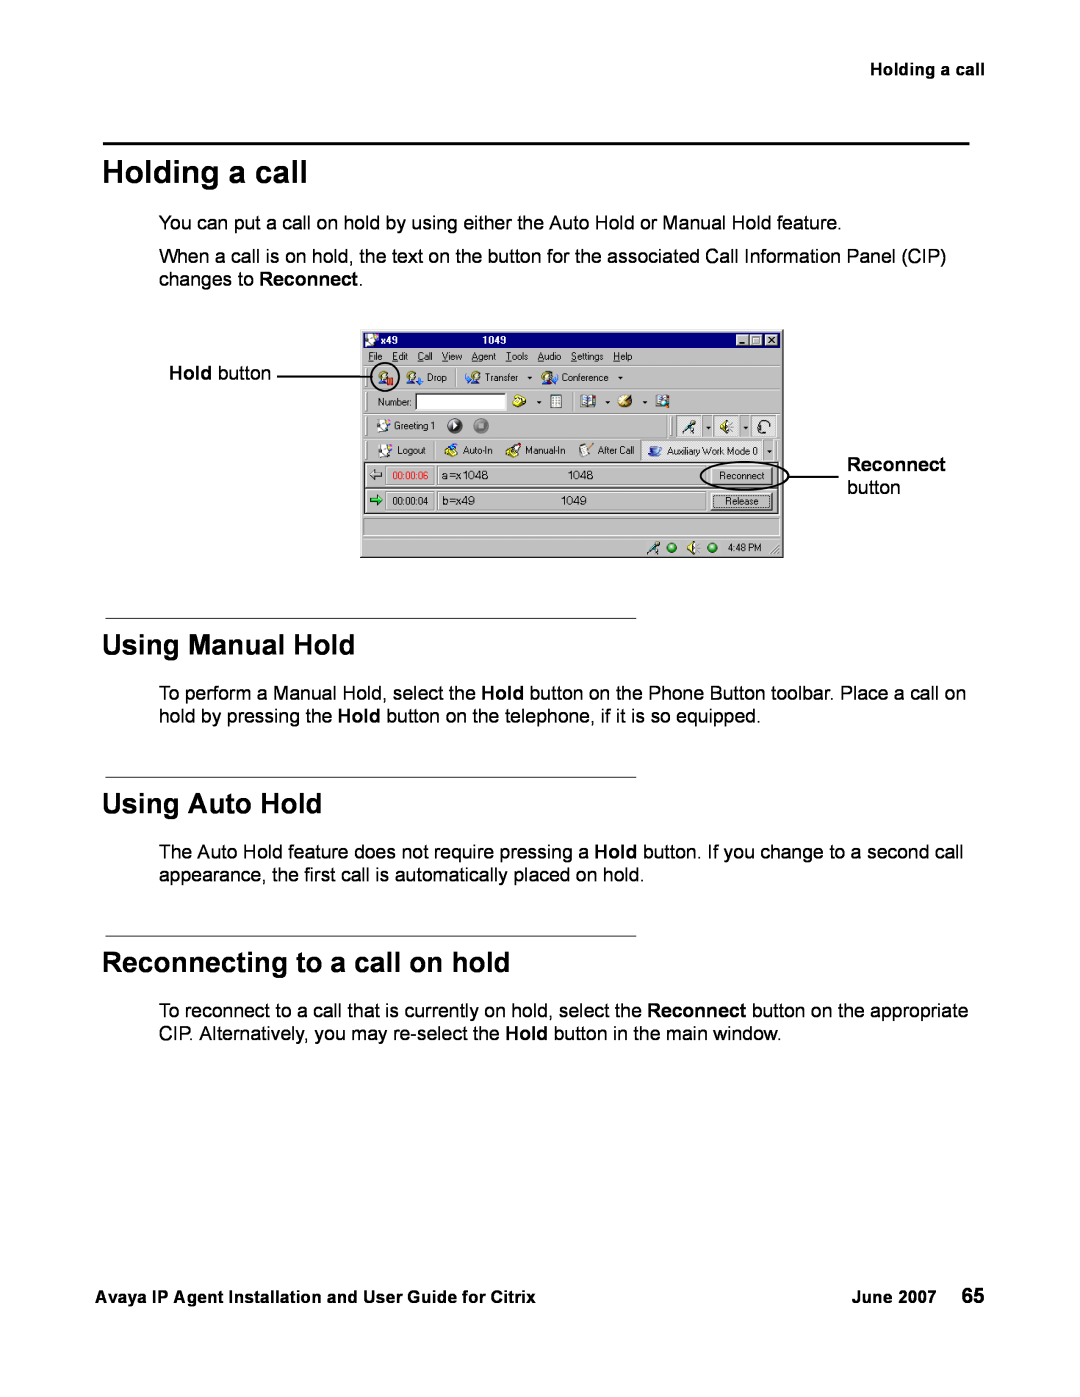 Avaya 7 manual Holding a call, Using Manual Hold, Using Auto Hold, Reconnecting to a call on hold 